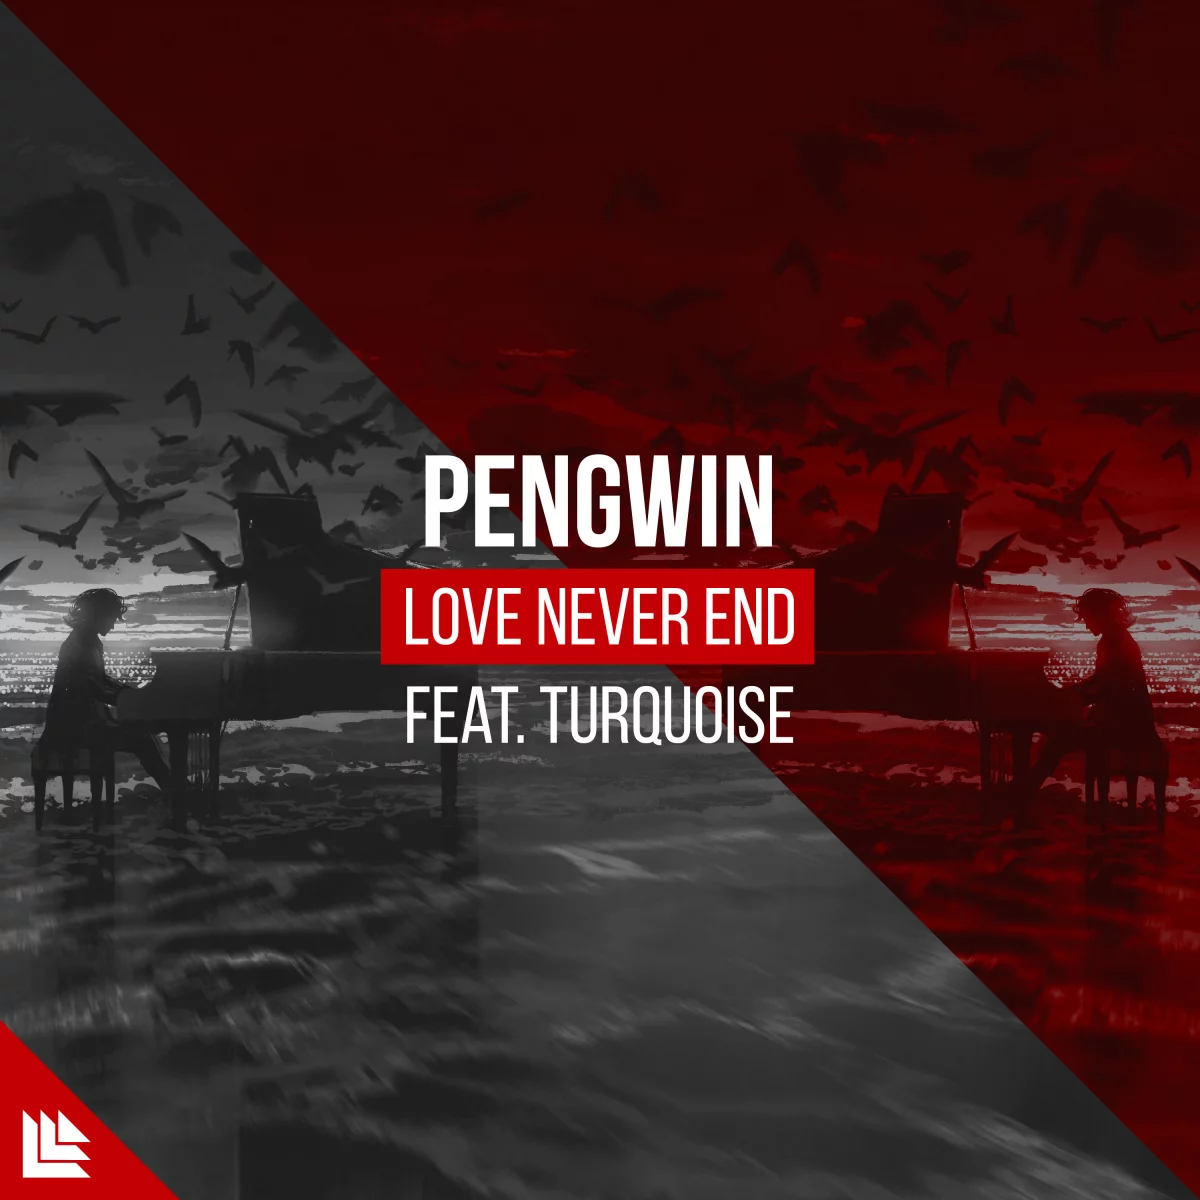 Love Never End - Pengwin⁠ feat. Turquoise⁠ 